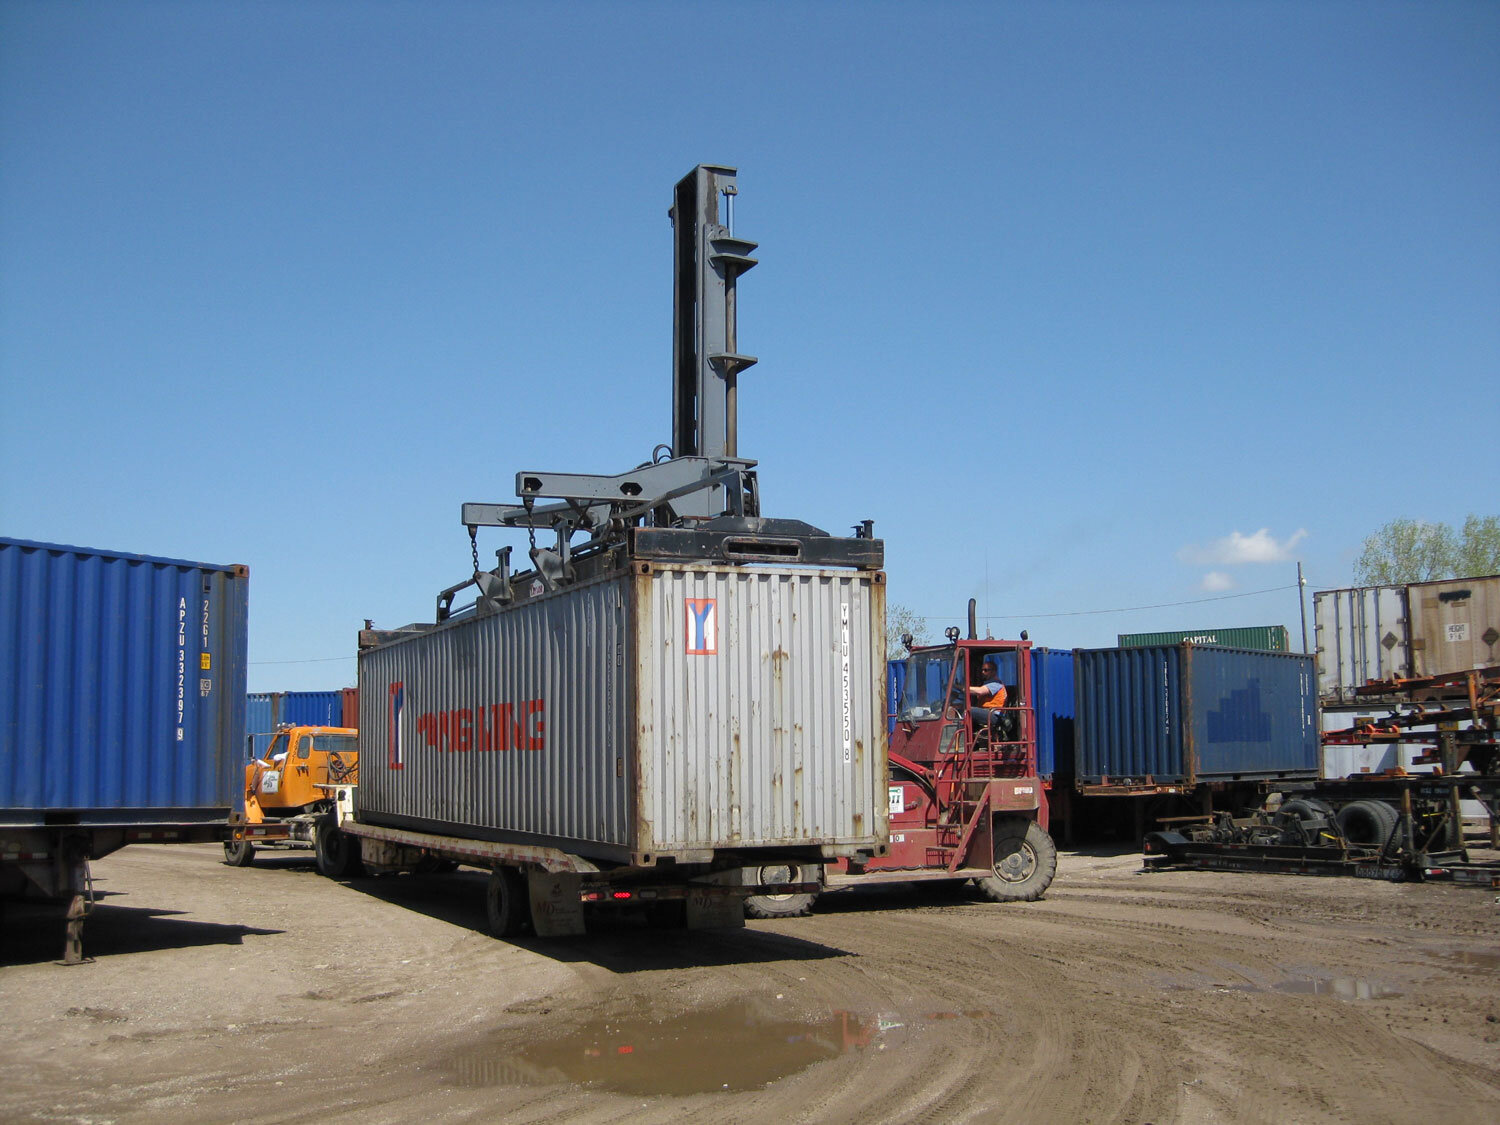 Cranes can load the container on a flat-bed or chassis